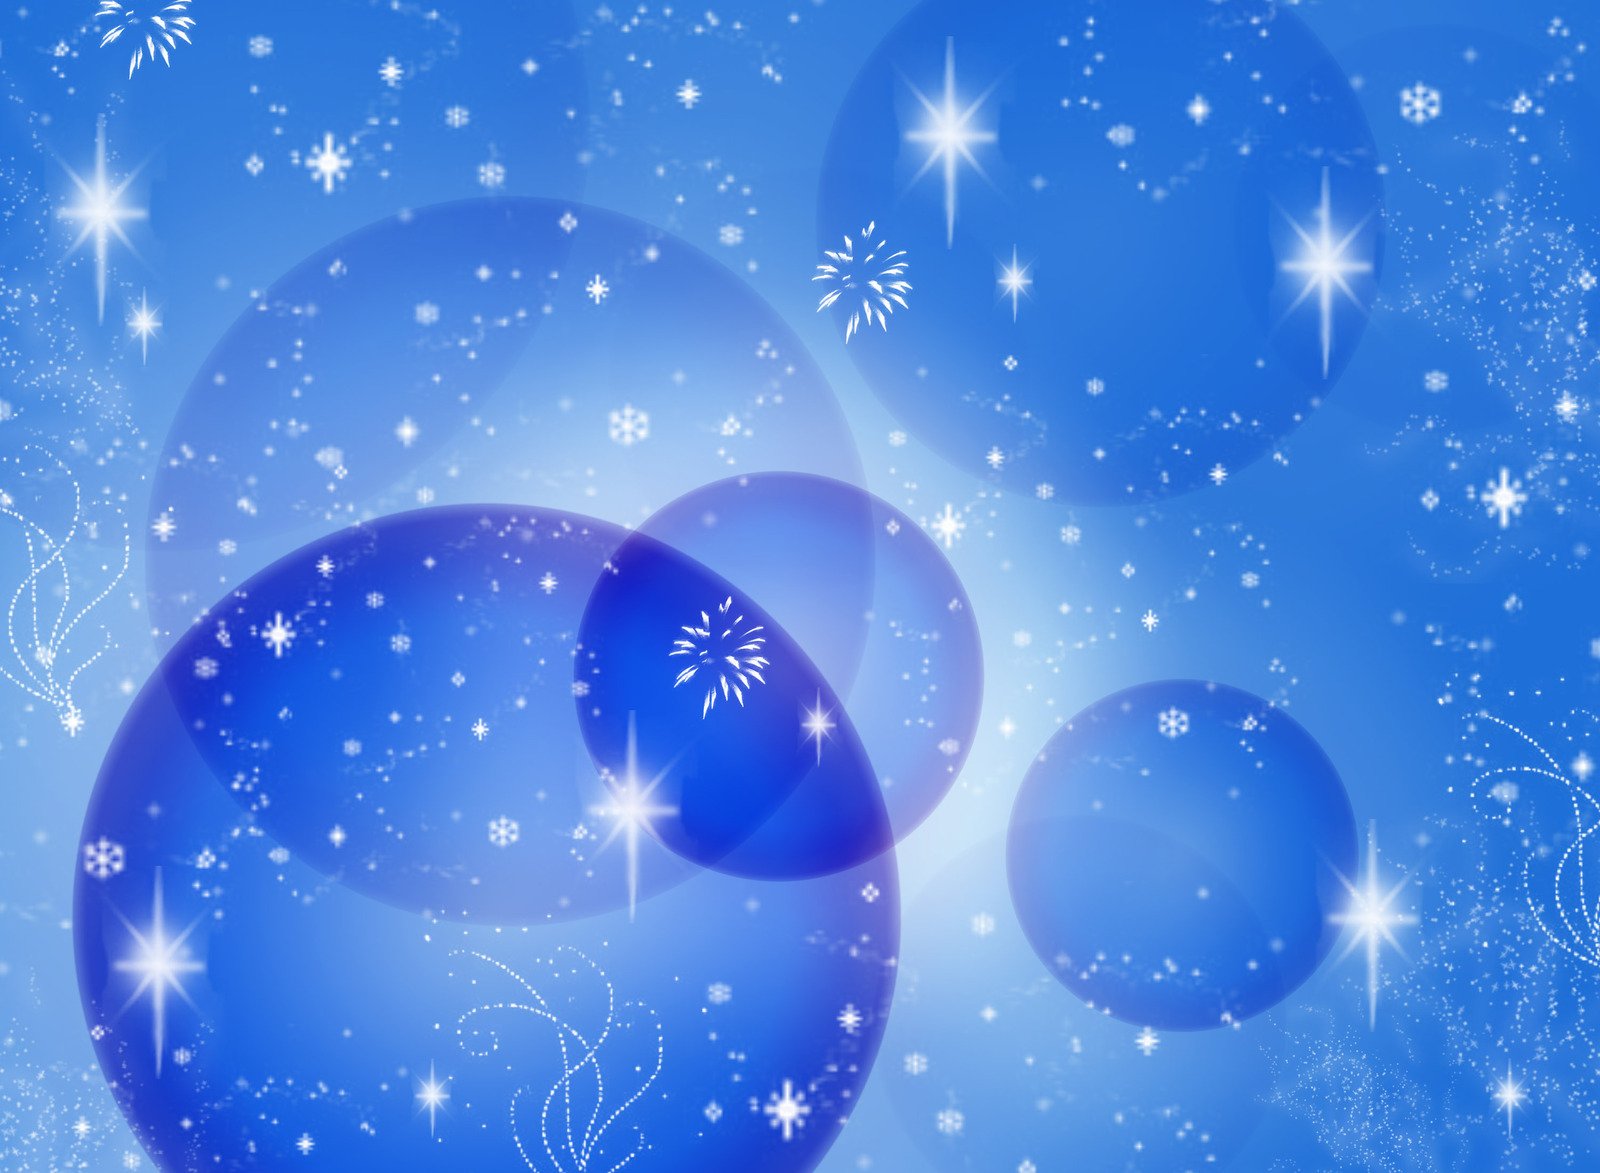 a blue abstract background with stars, shapes and bubbles